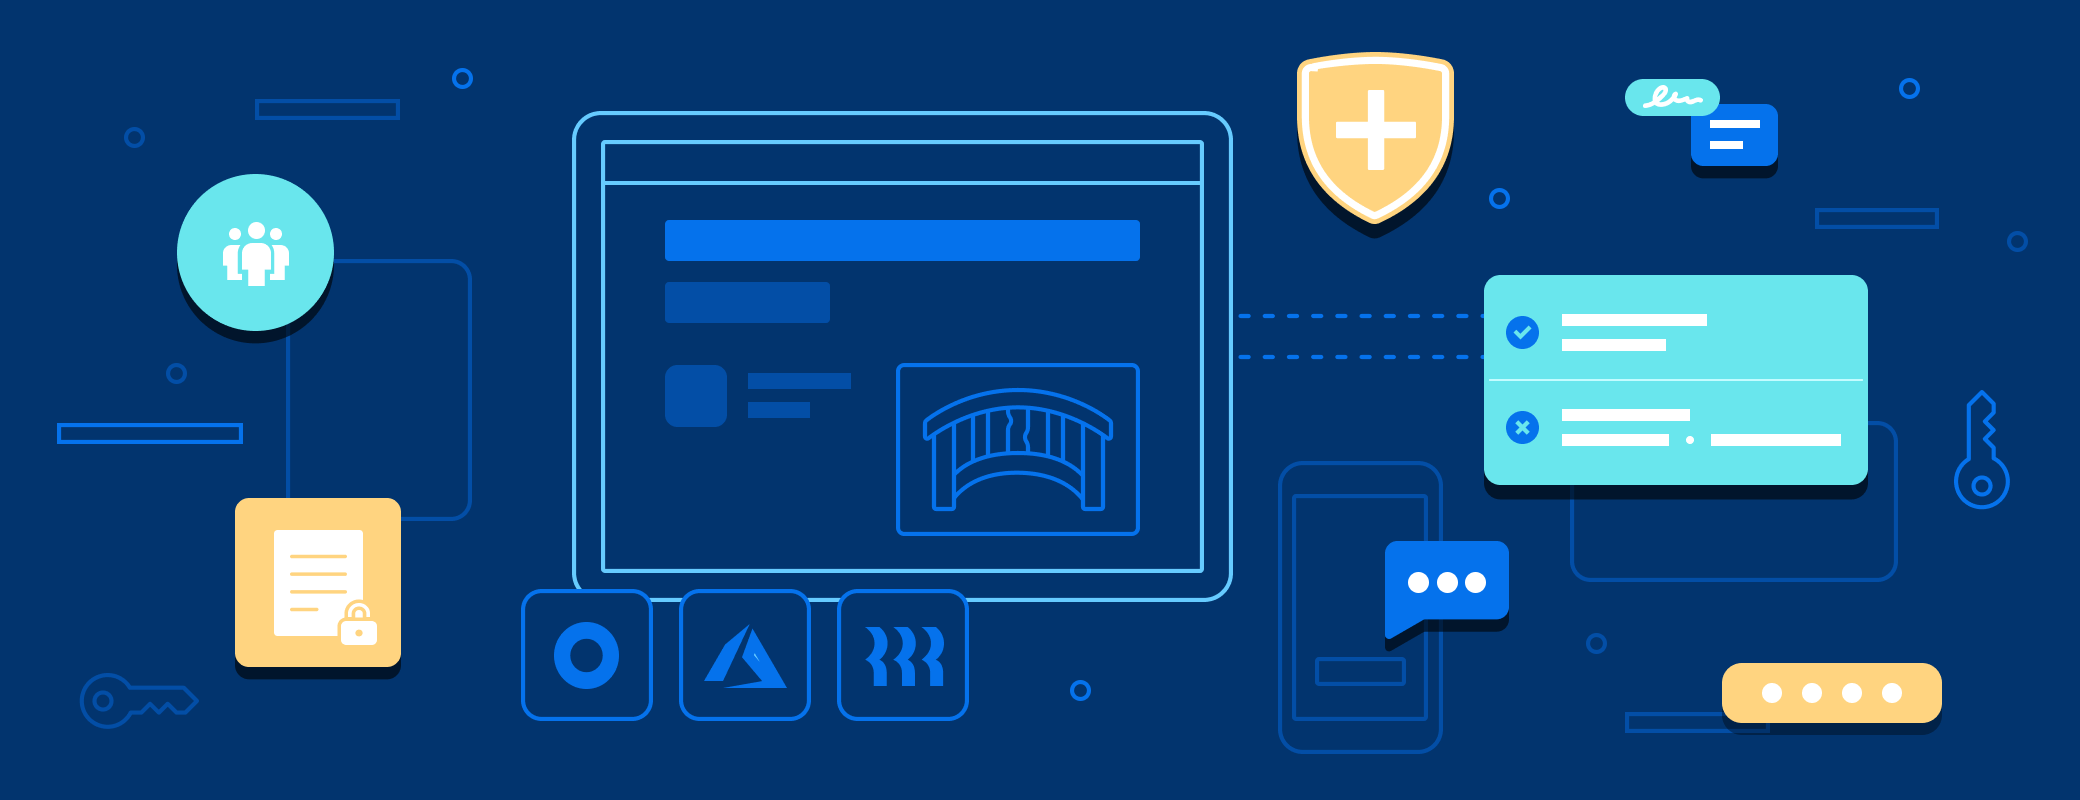 1Password SCIM bridge explained: what it is, and why we made it